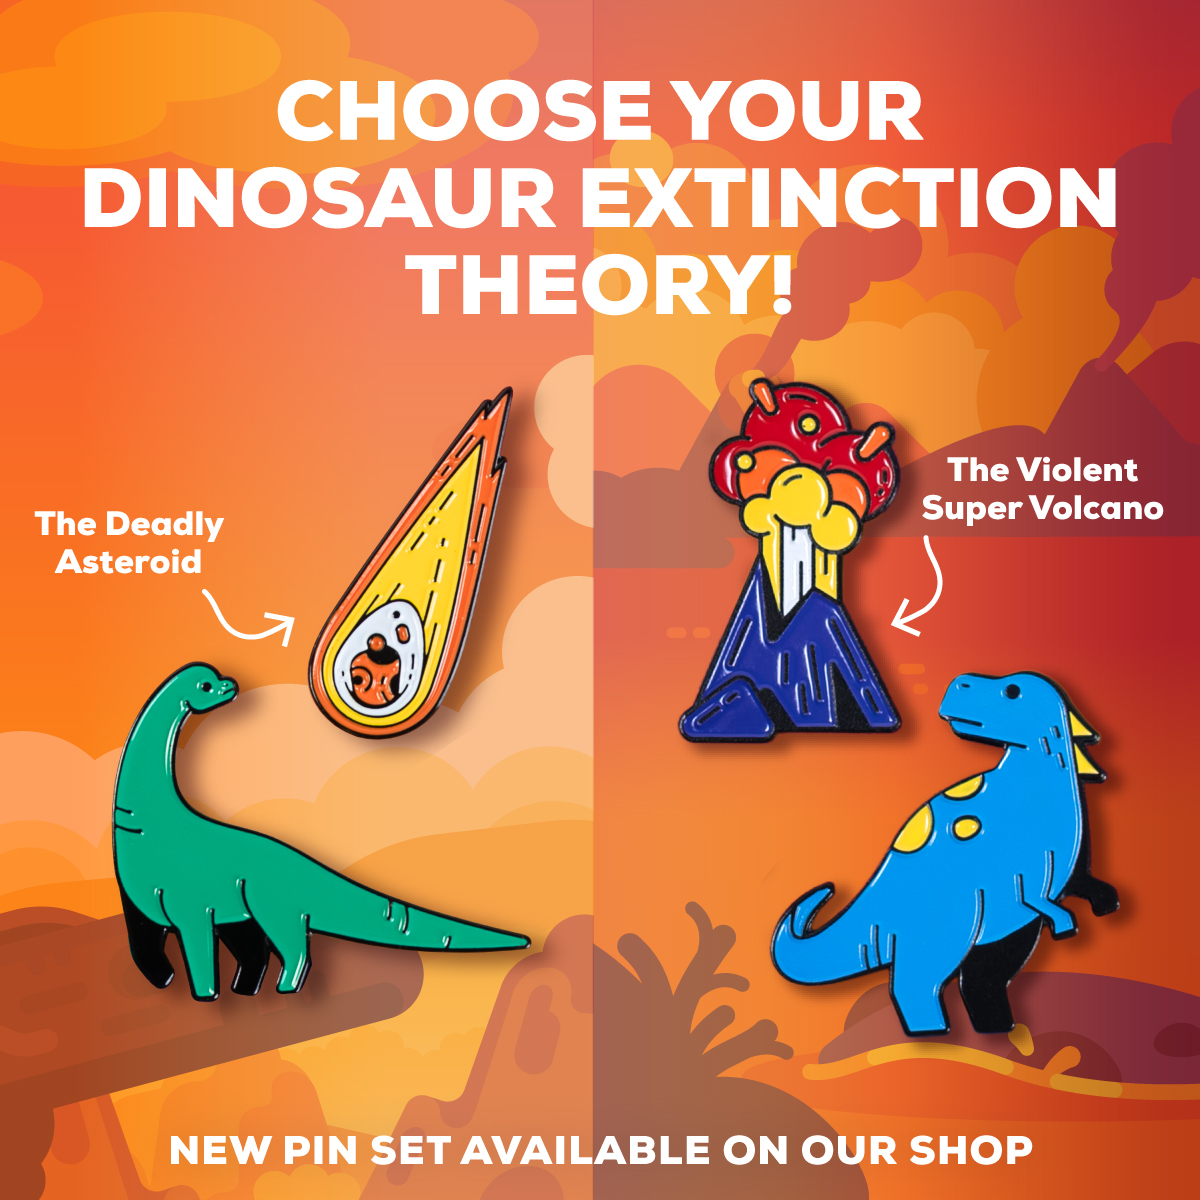 Someone caused the dinosaurs' extinction and we need to find out who! Was it the asteroid impact 🦕☄️ or violent volcanic activity 🦖🌋? Well, there is evidence for both! Pick your favorite theory and show it to the world with our brand-new Dino Pin Set: kgs.link/4cqpxf8